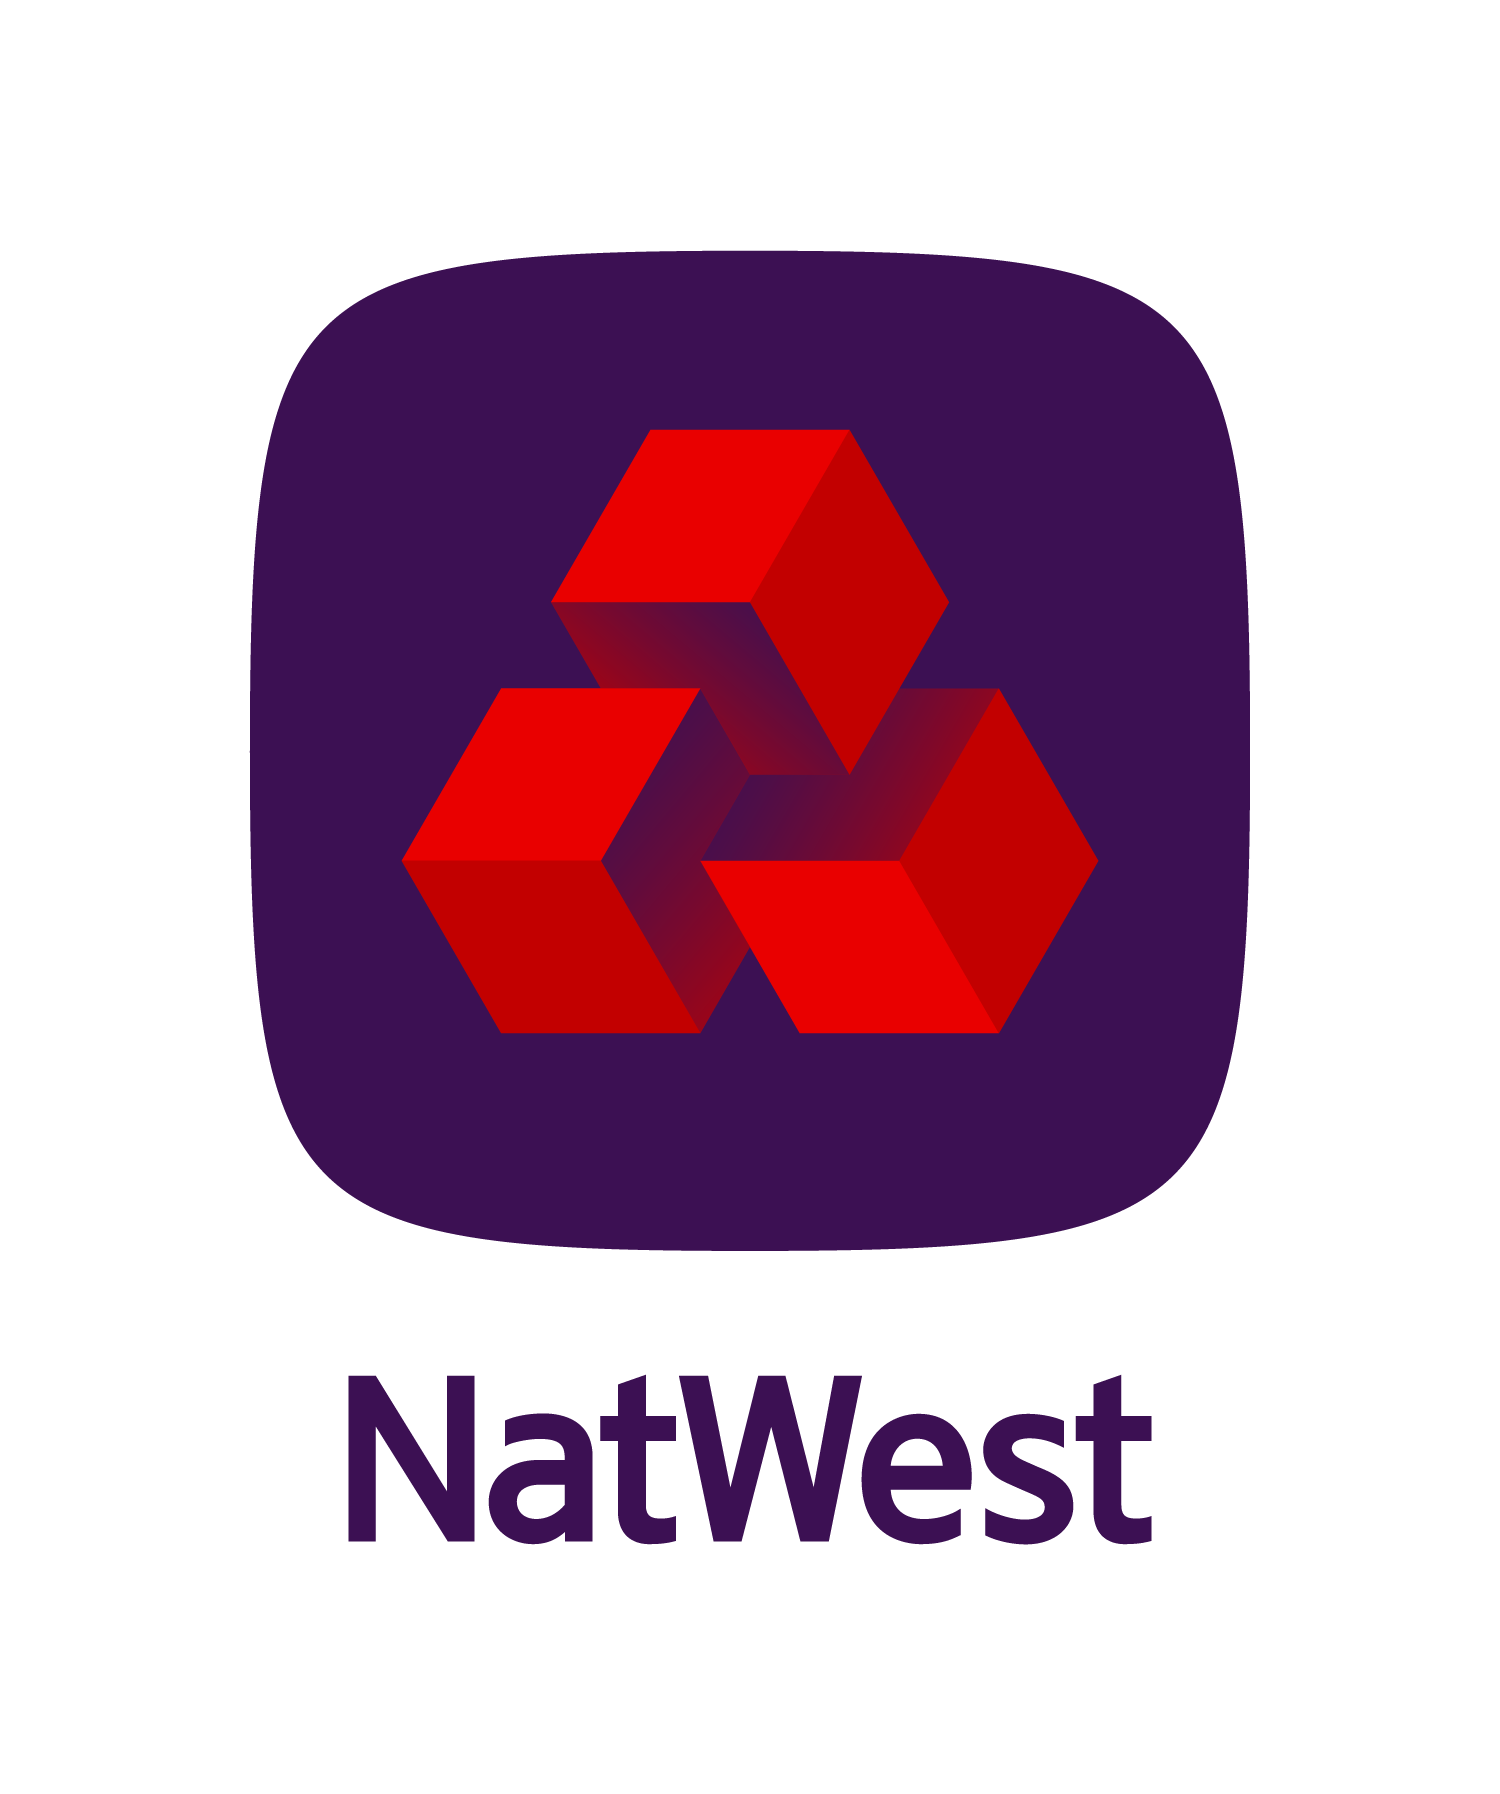 the natwest logo is a purple square with red cubes on it .